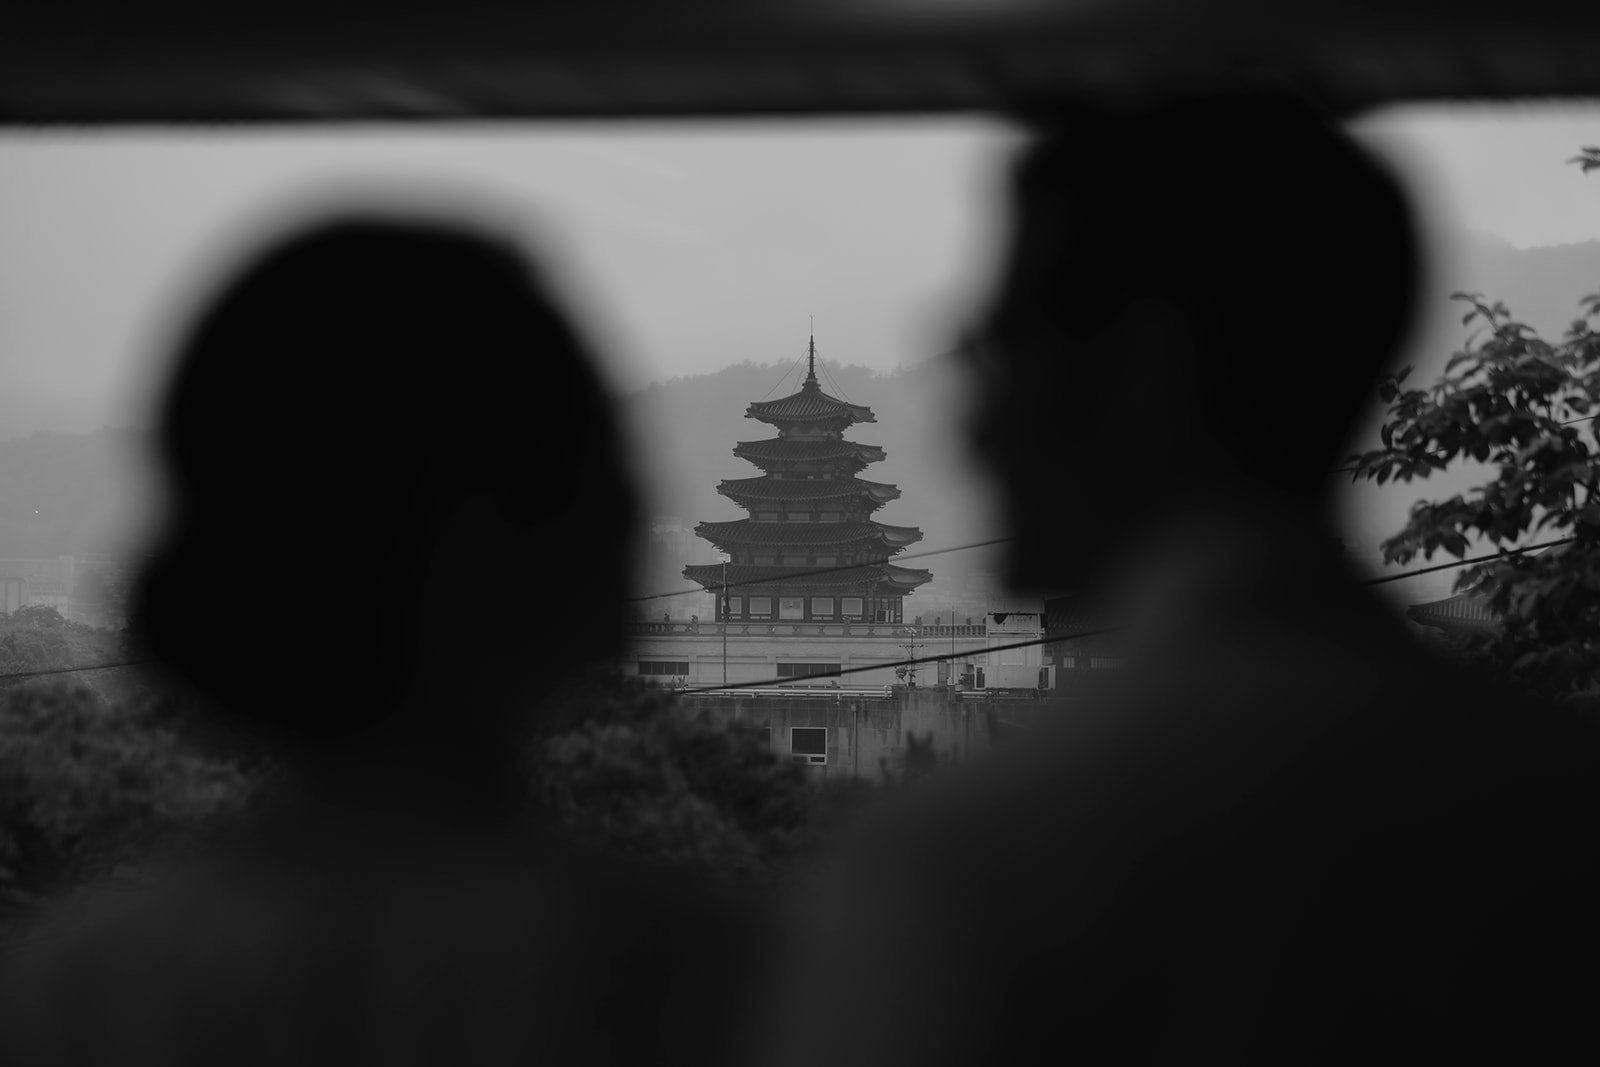 A bride and groom standing in front of an outdoor pagoda on their wedding day.